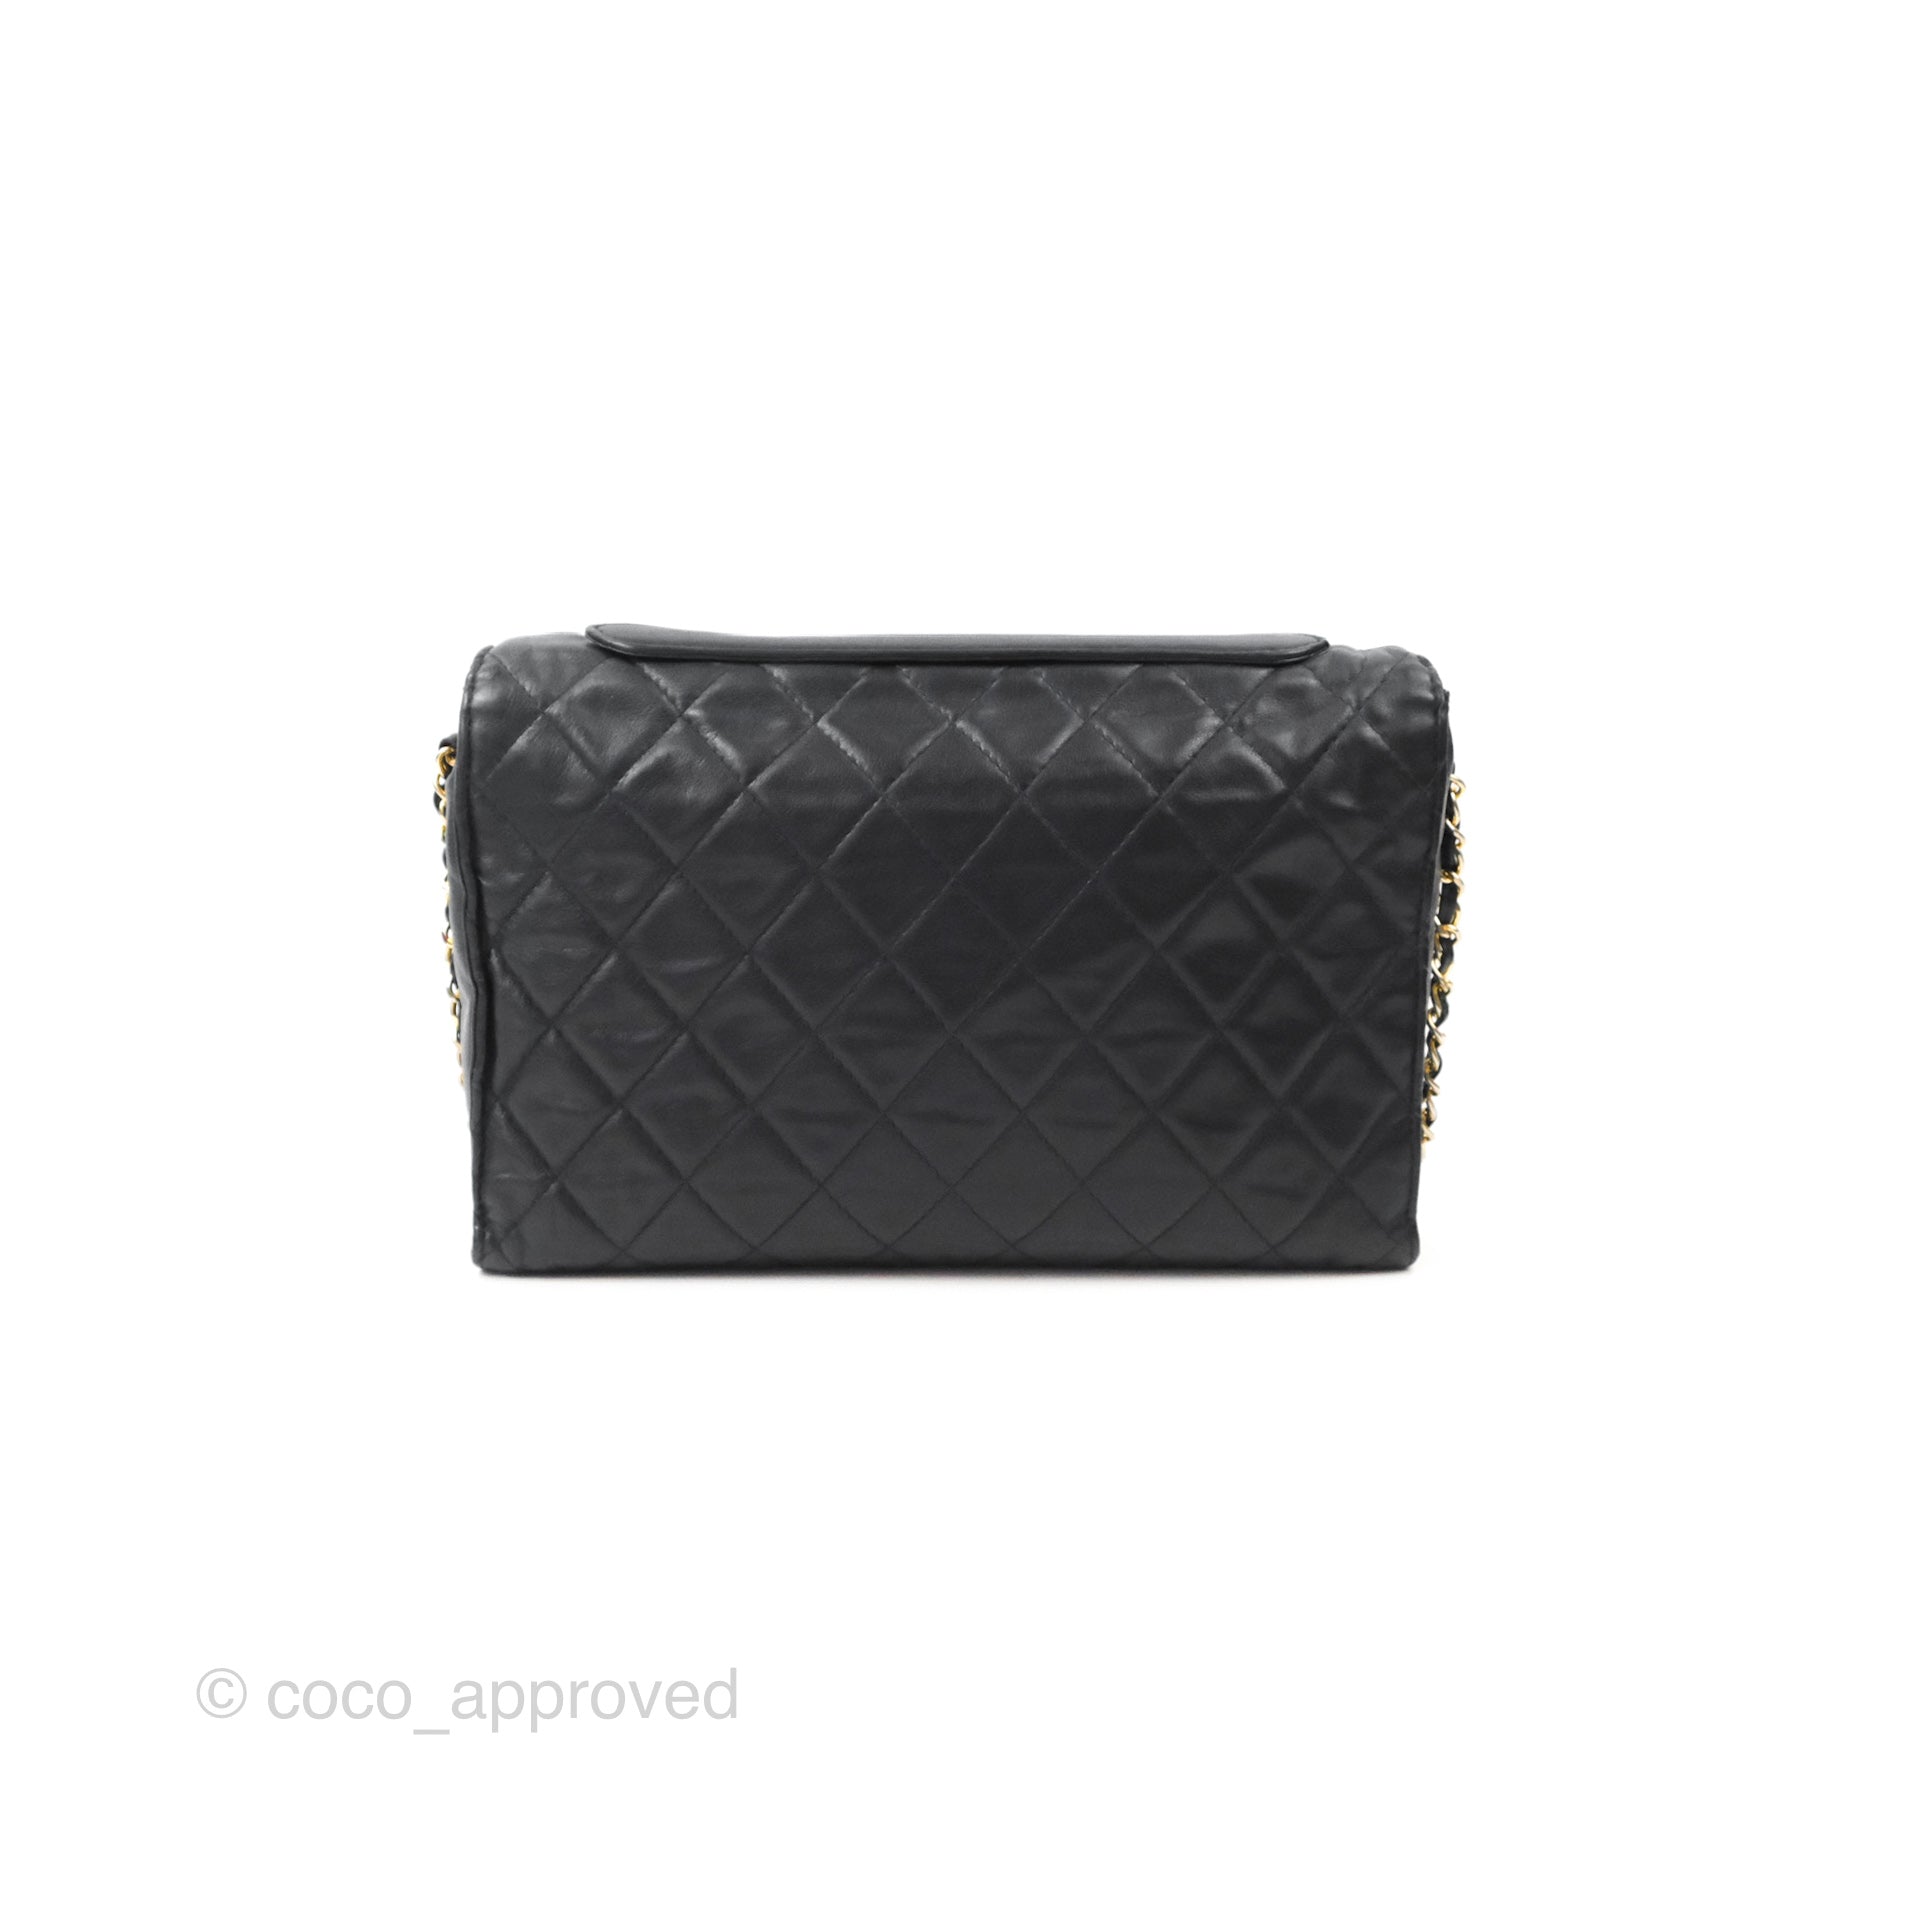 CHANEL, MIDNIGHT BLUE QUILTED FLOWER FLAP MINI, Chanel: Handbags and  Accessories, 2020